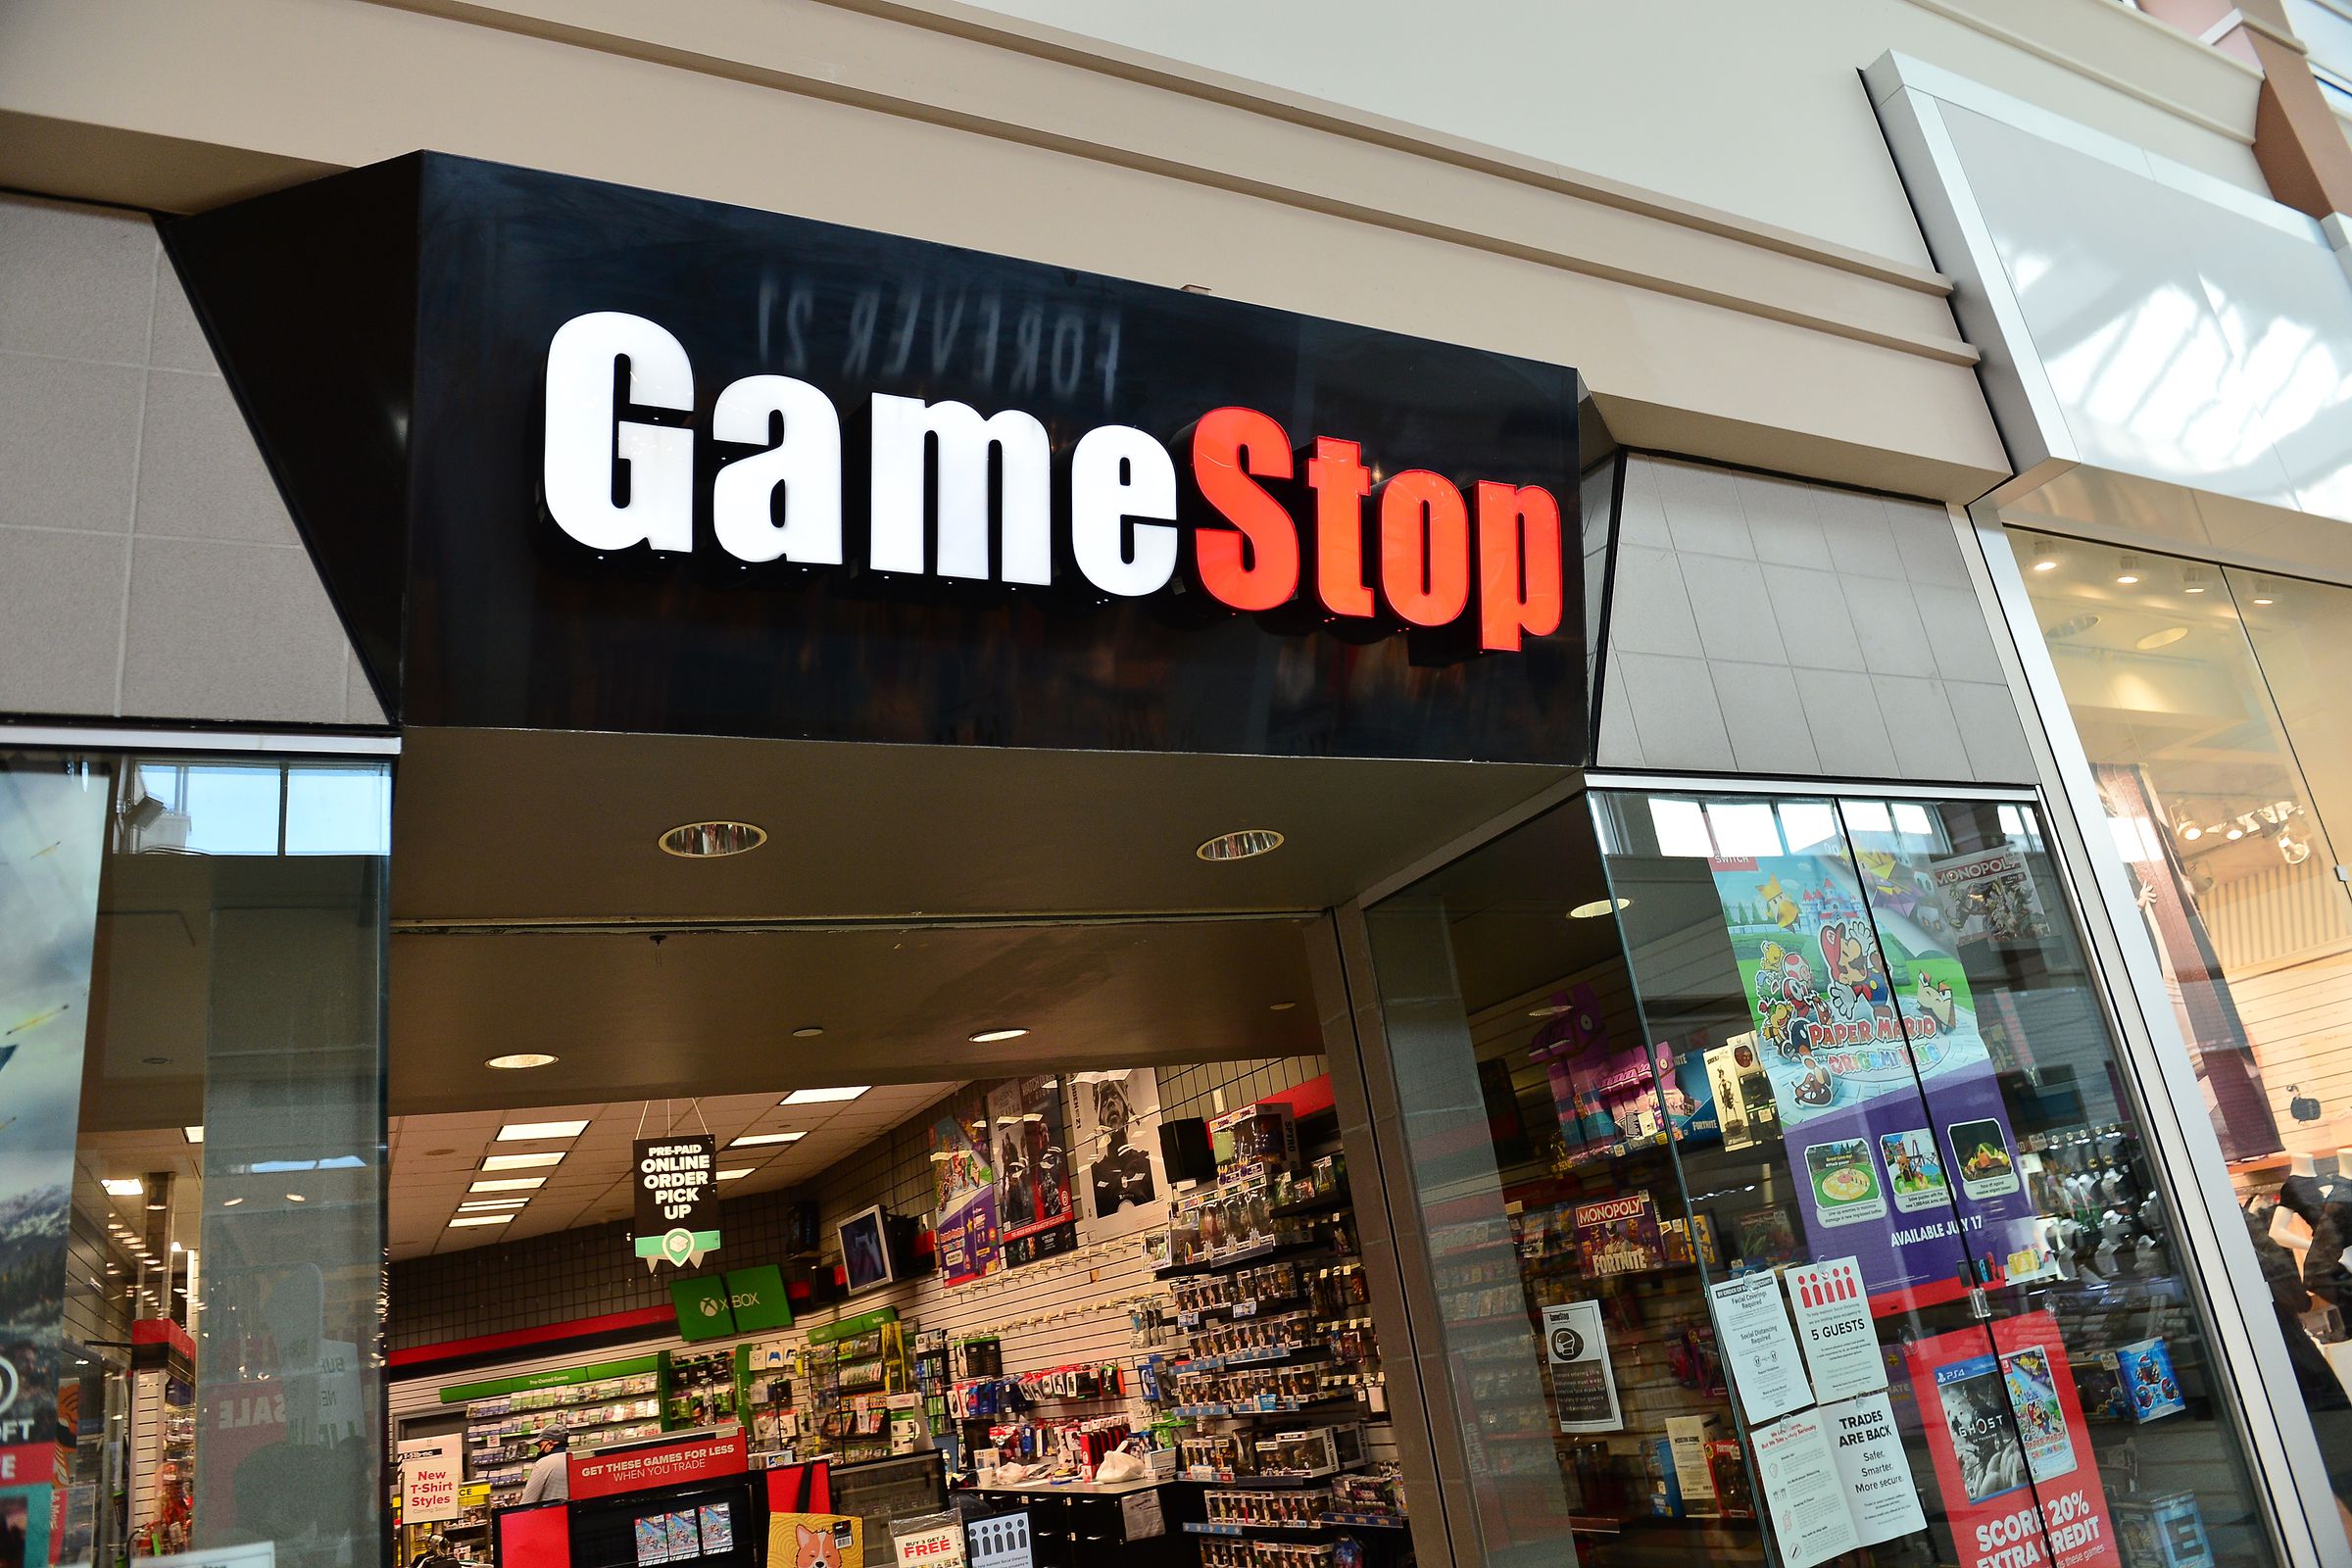 GameStop stock halted trading briefly Friday